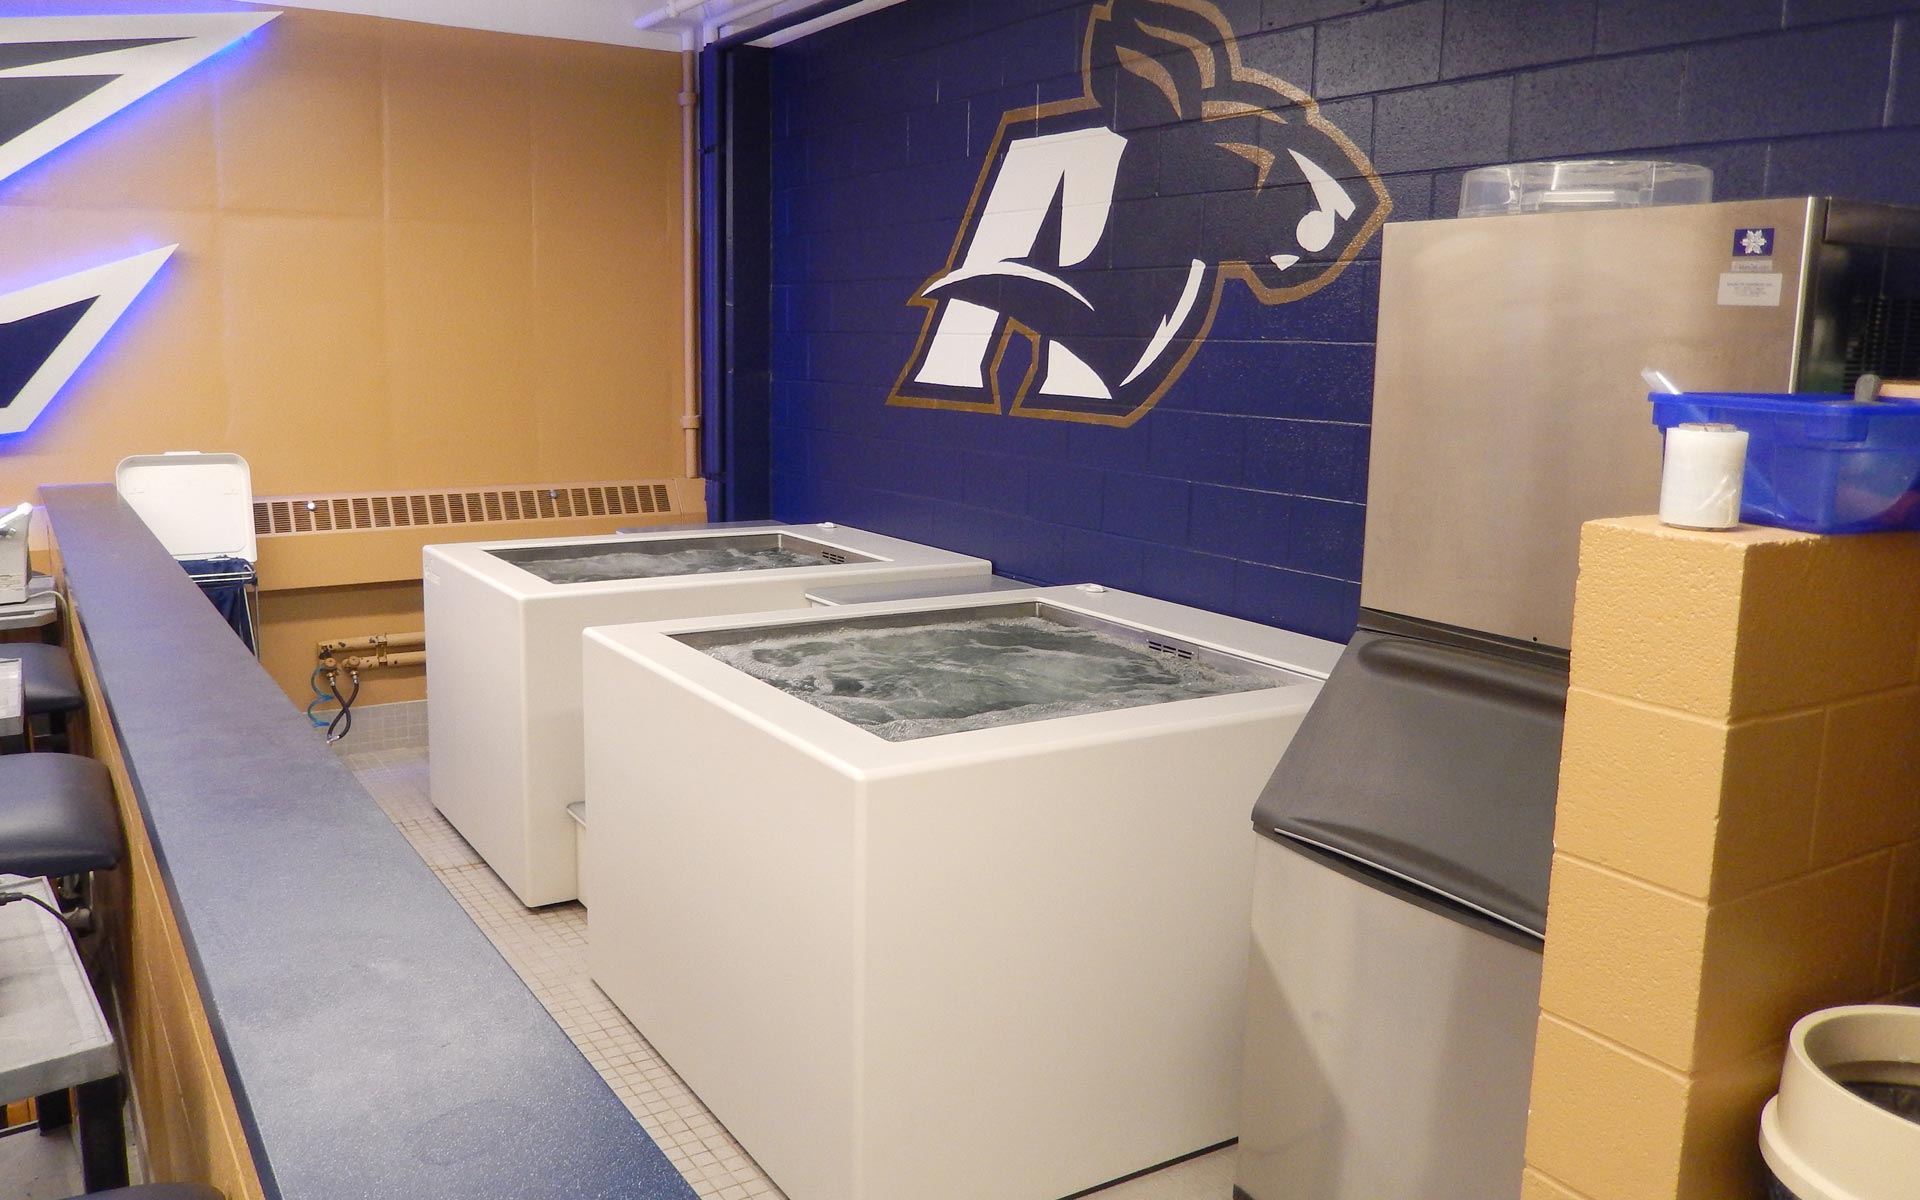 U of Akron 4010 CRYOTherm Grimm Scientific hydrotherapy system